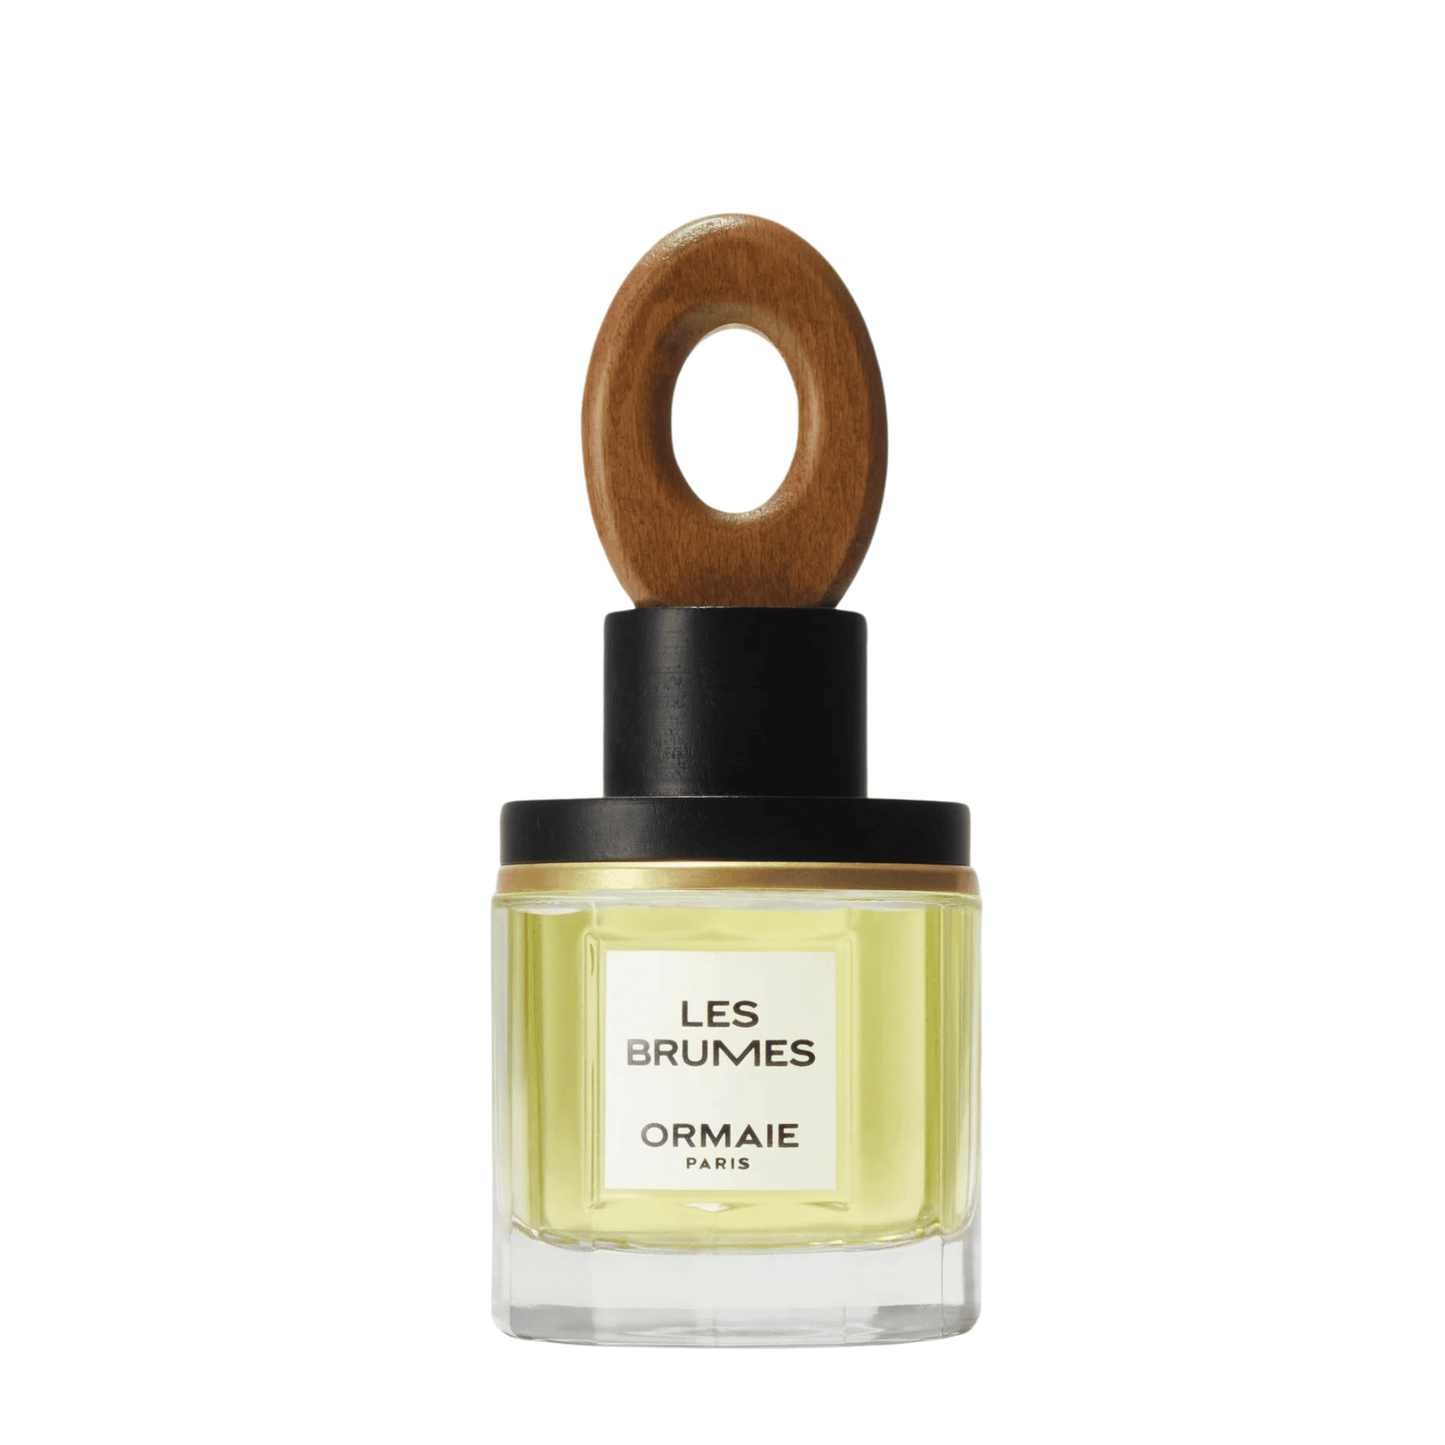 Primary Image of Les Brumes EDP (50 ml)